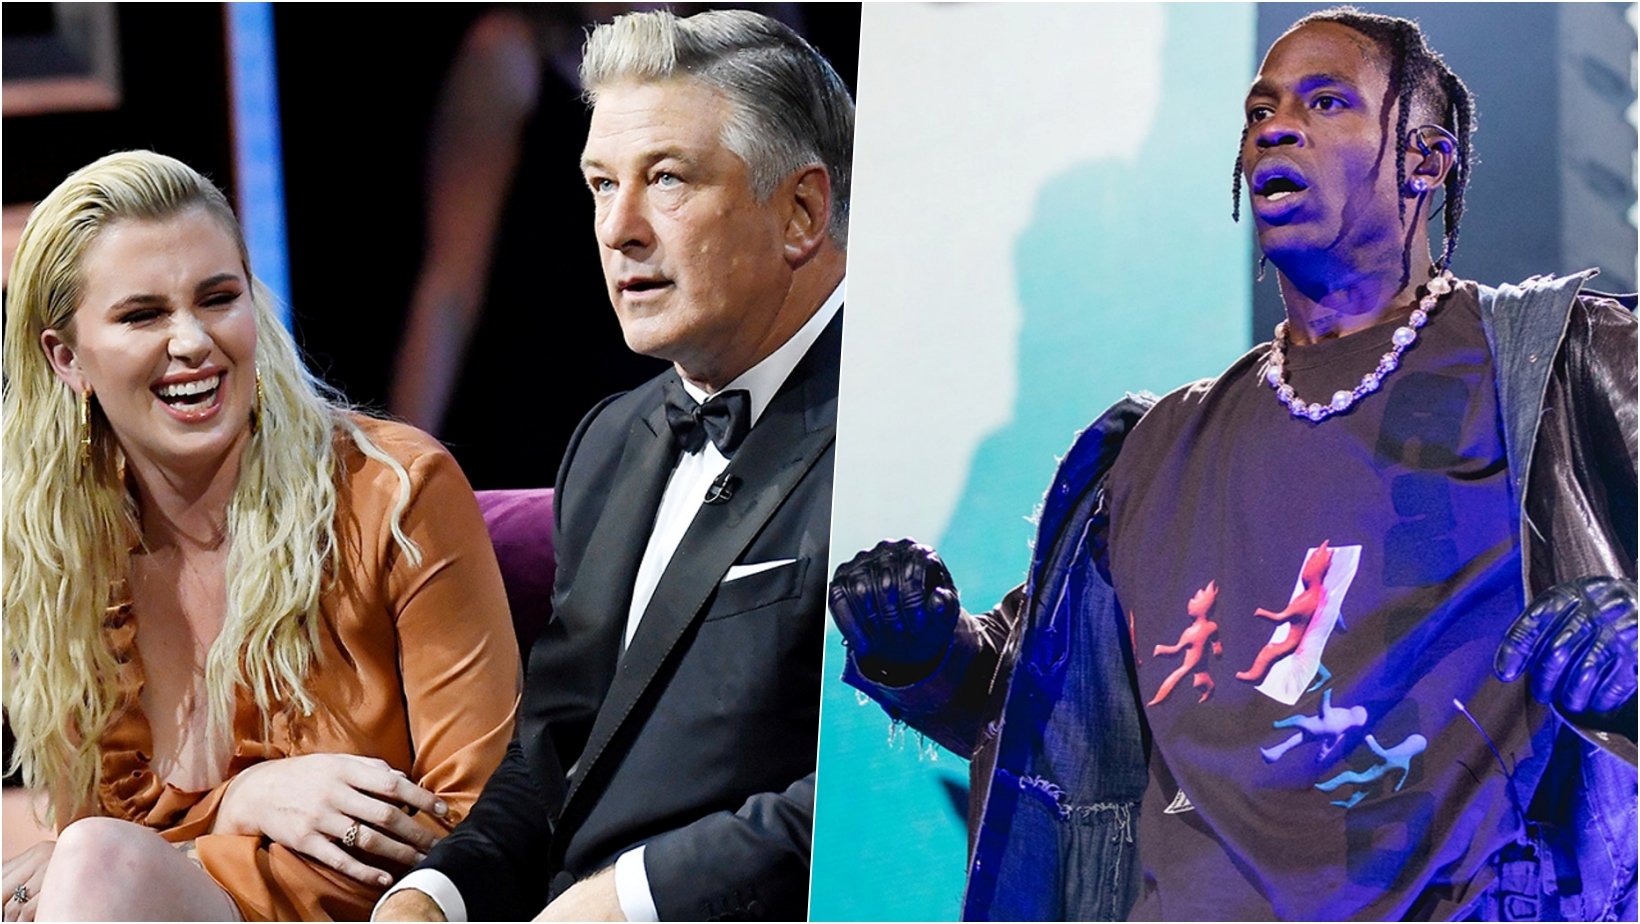 6 facebook cover 9.jpg?resize=1200,630 - Alec Baldwin's Daughter Defends Rapper Travis Scott, Comparing The Astroworld Tragedy With The Rust Shooting Backlash Her Father Endured